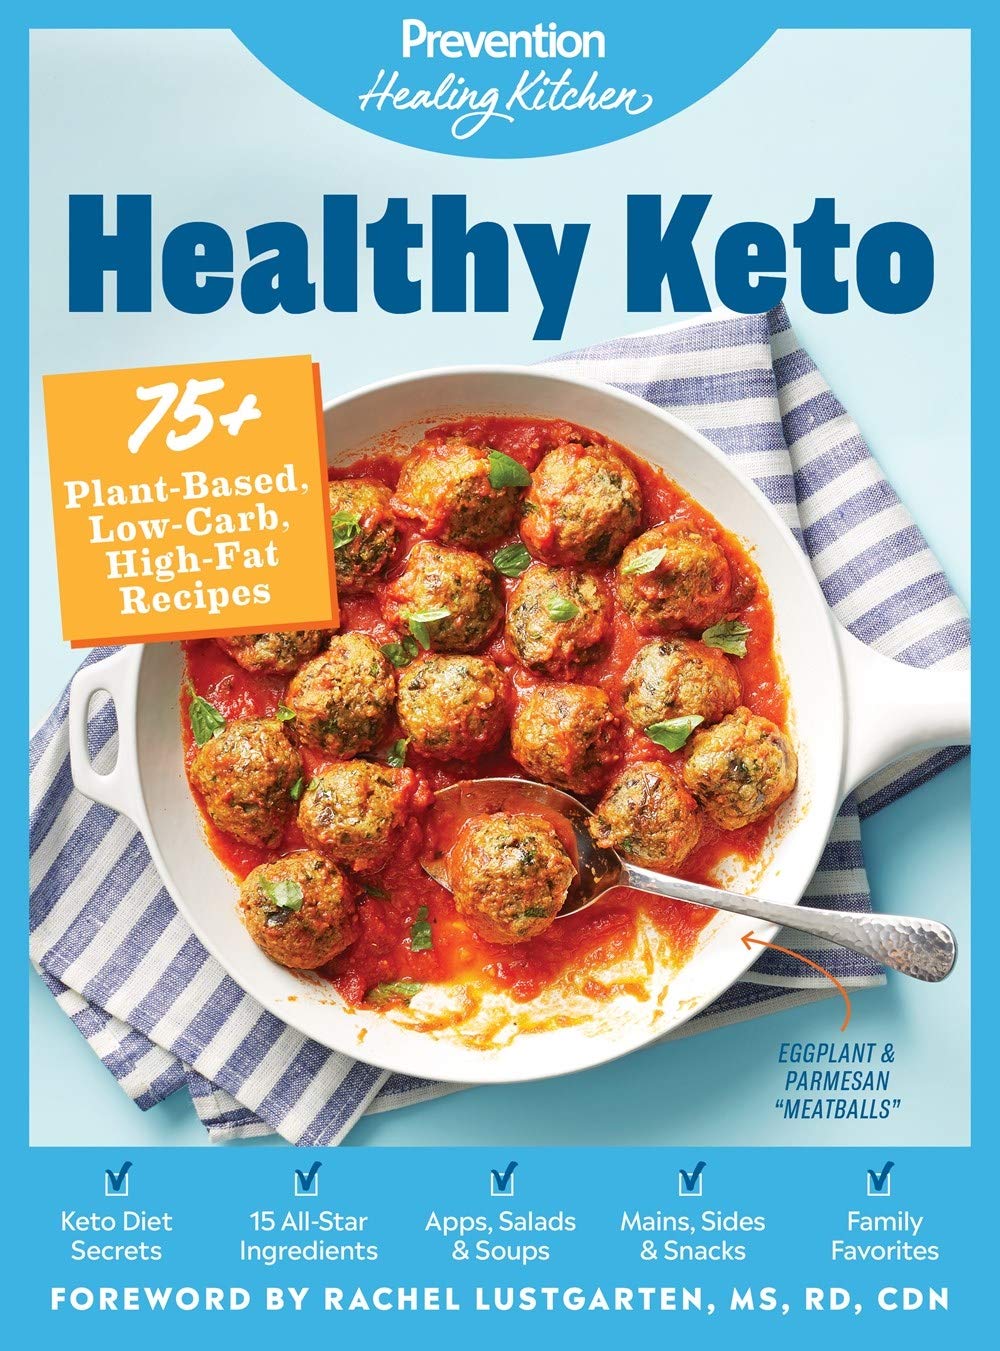 Healthy Keto: Prevention Healing Kitchen: 75+ Plant-Based, Low-Carb, High-Fat Recipes